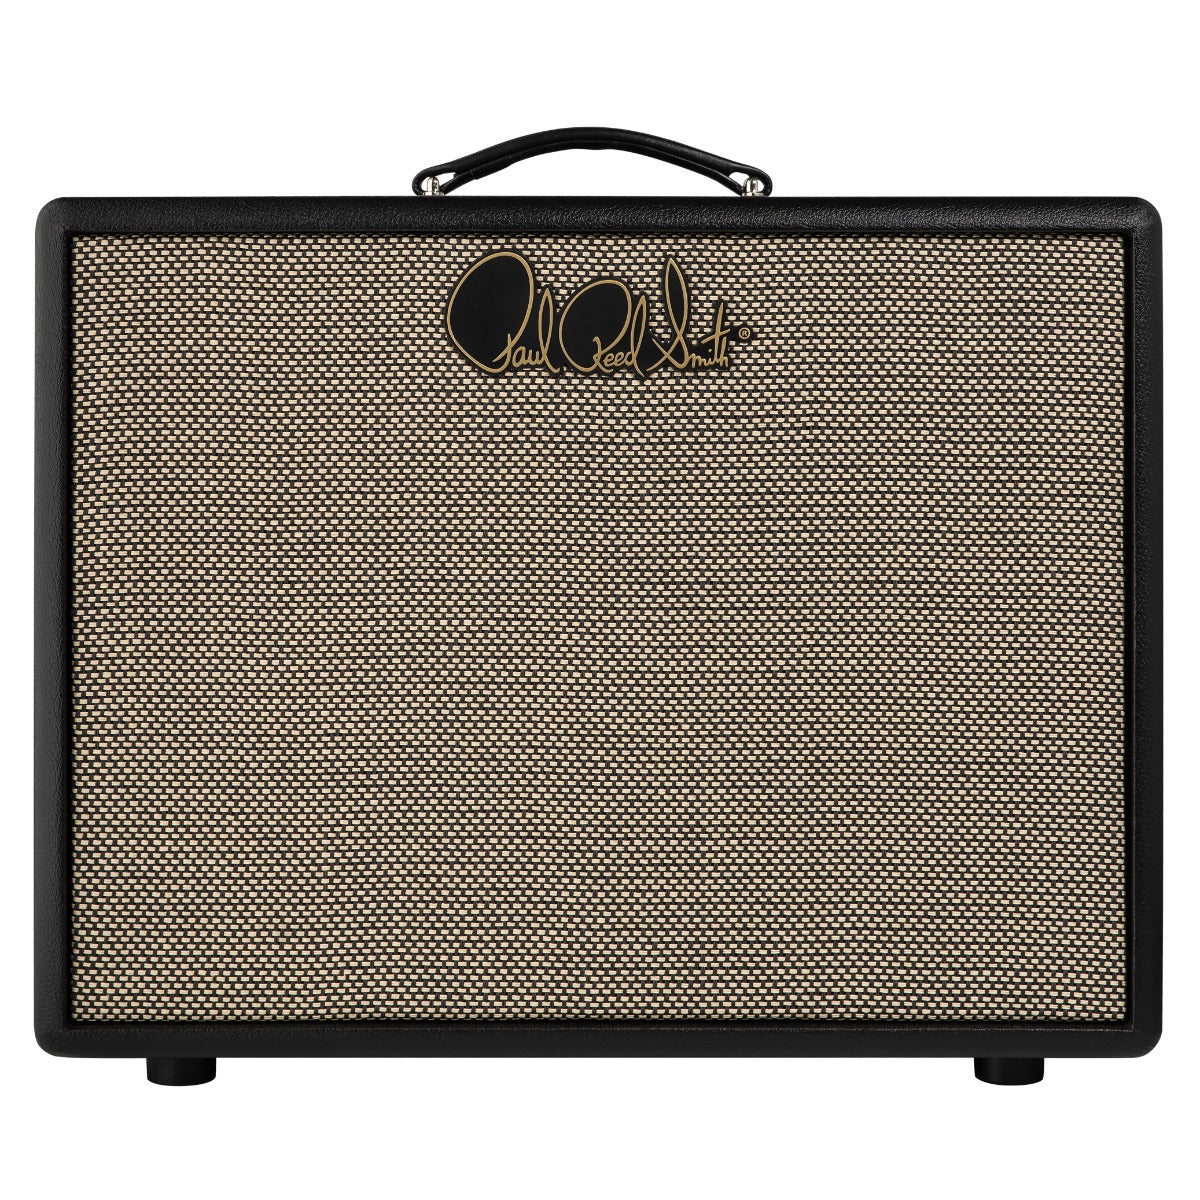 PRS HDRX 1x12 Closed Back Cabinet, View 1